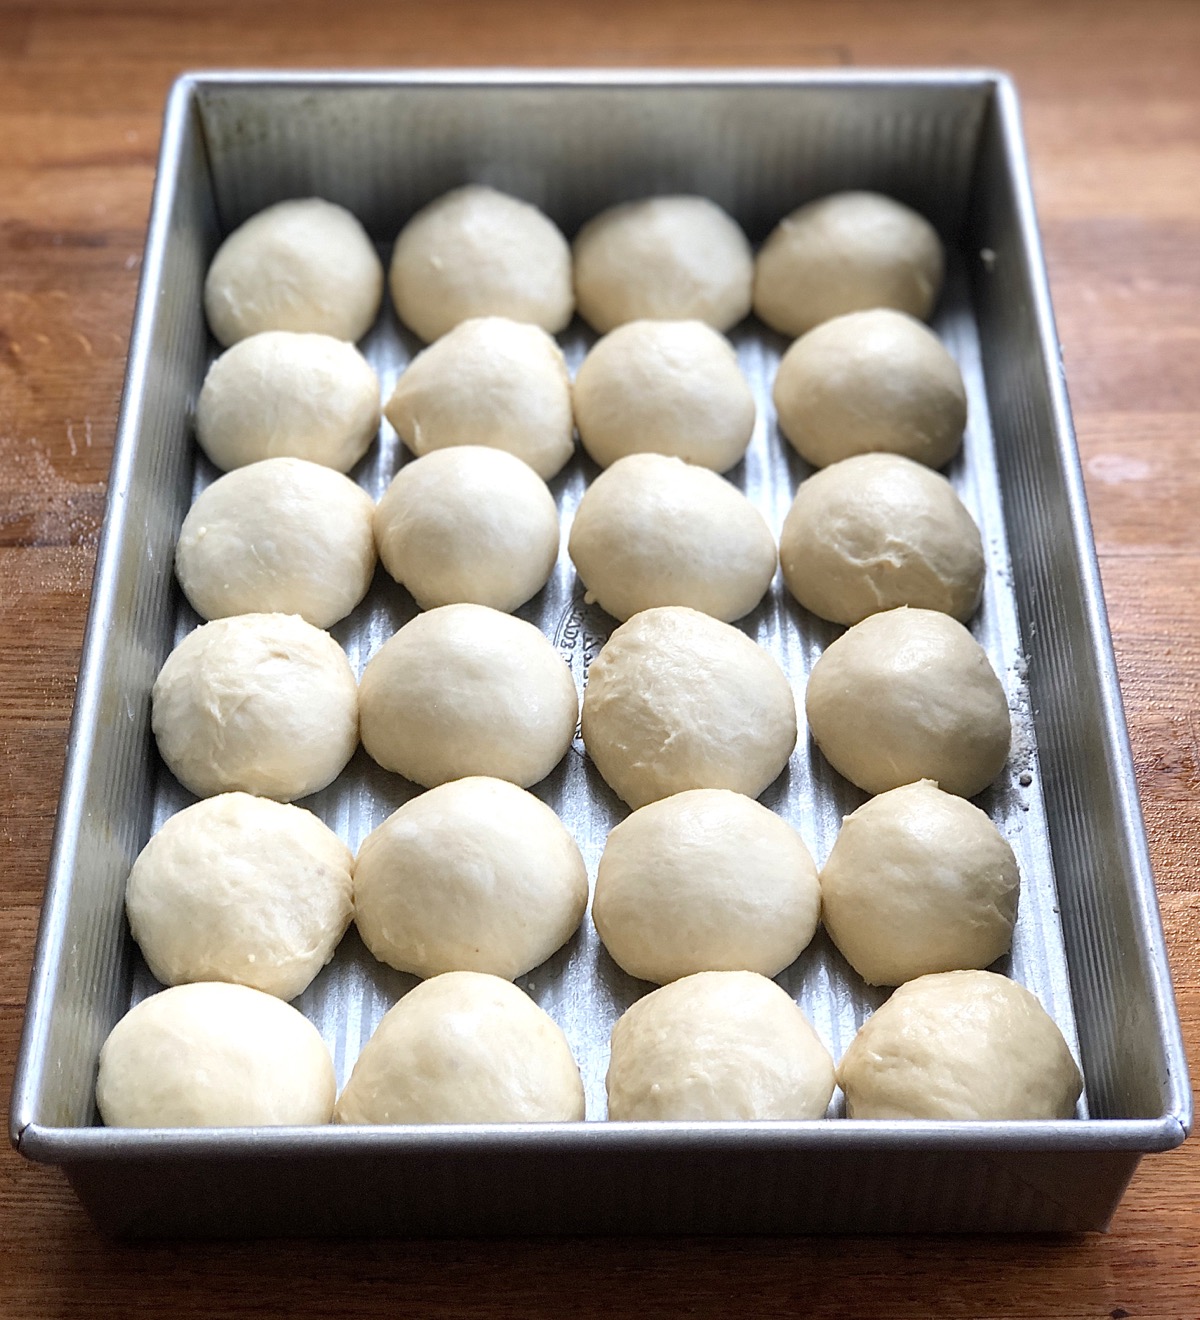 Two dozen Amish Dinner Rolls in a 9" x 13" pan, ready to rise.